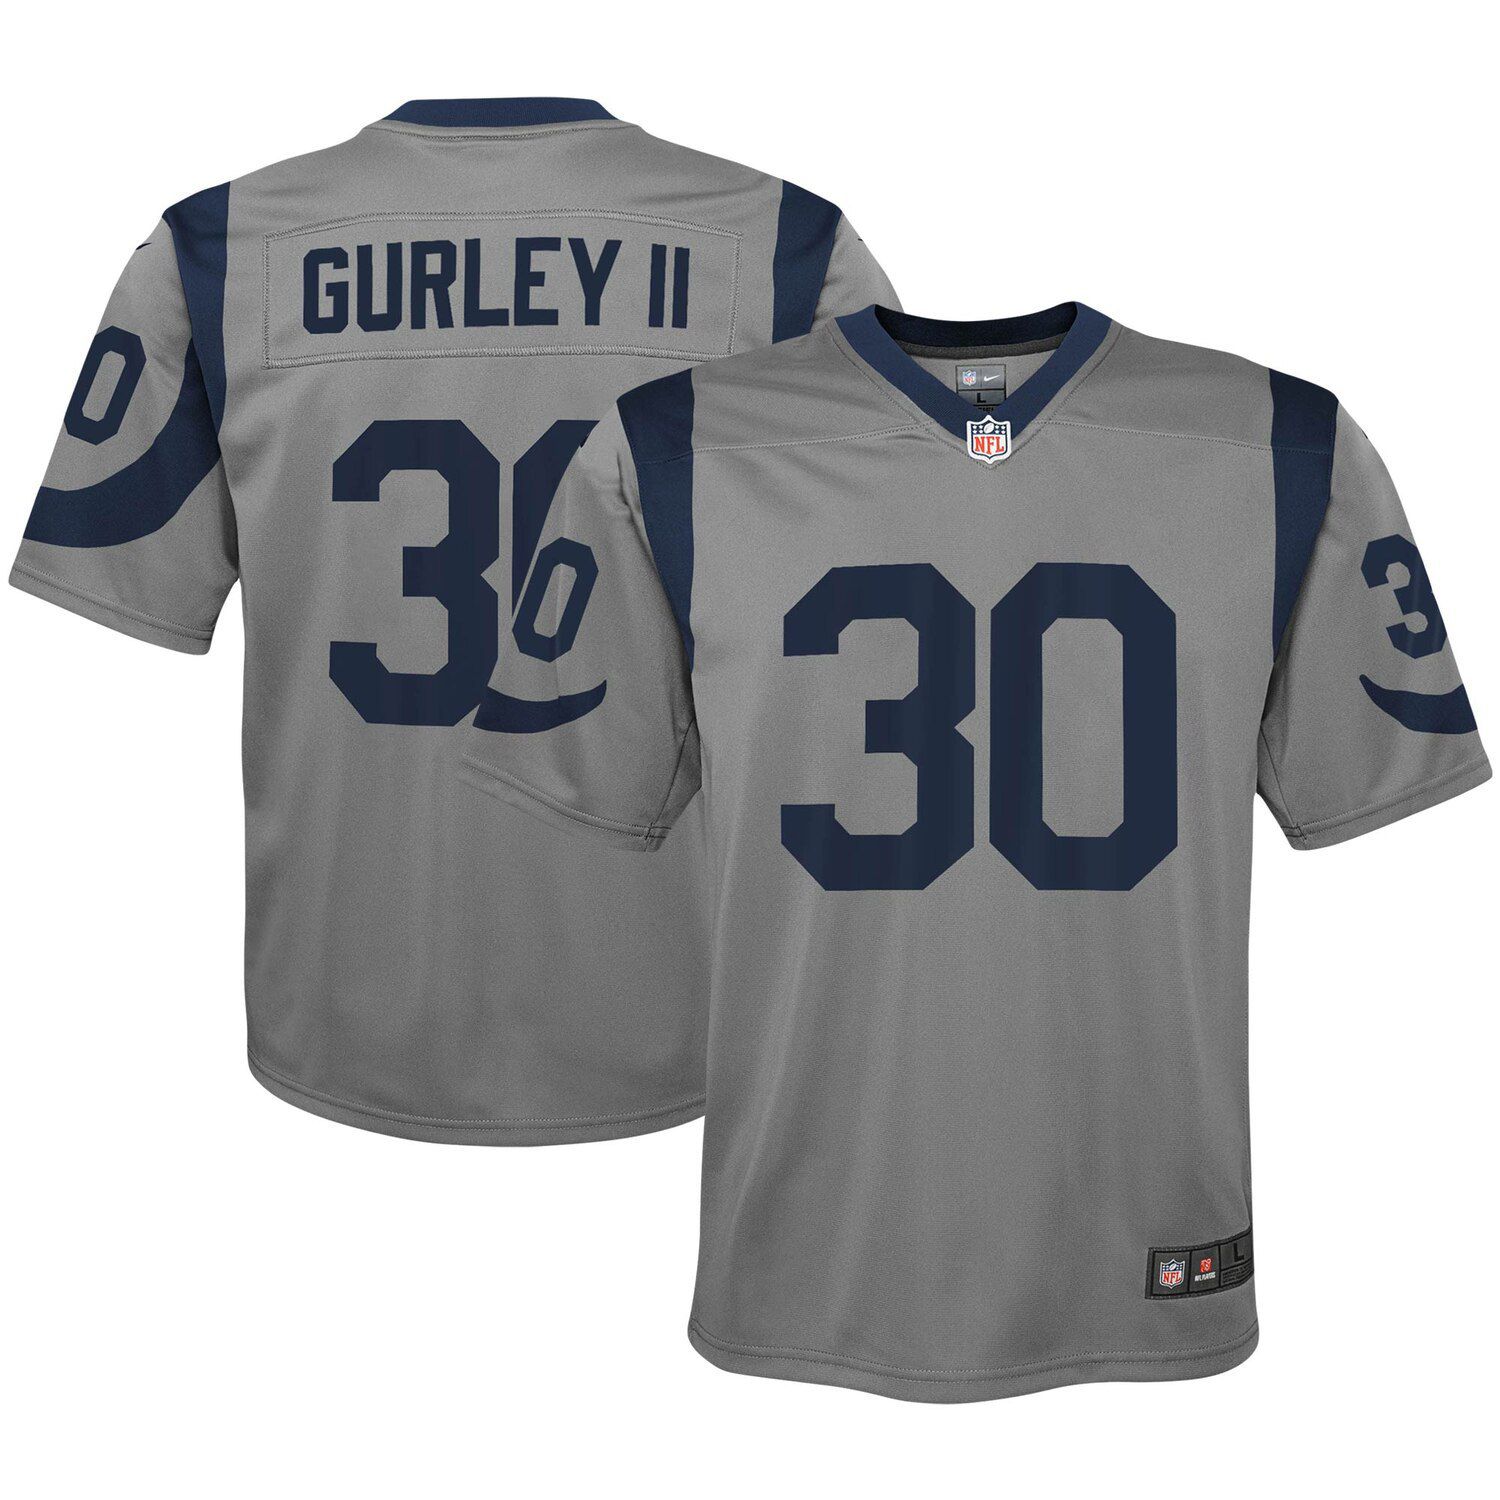 gurley youth jersey